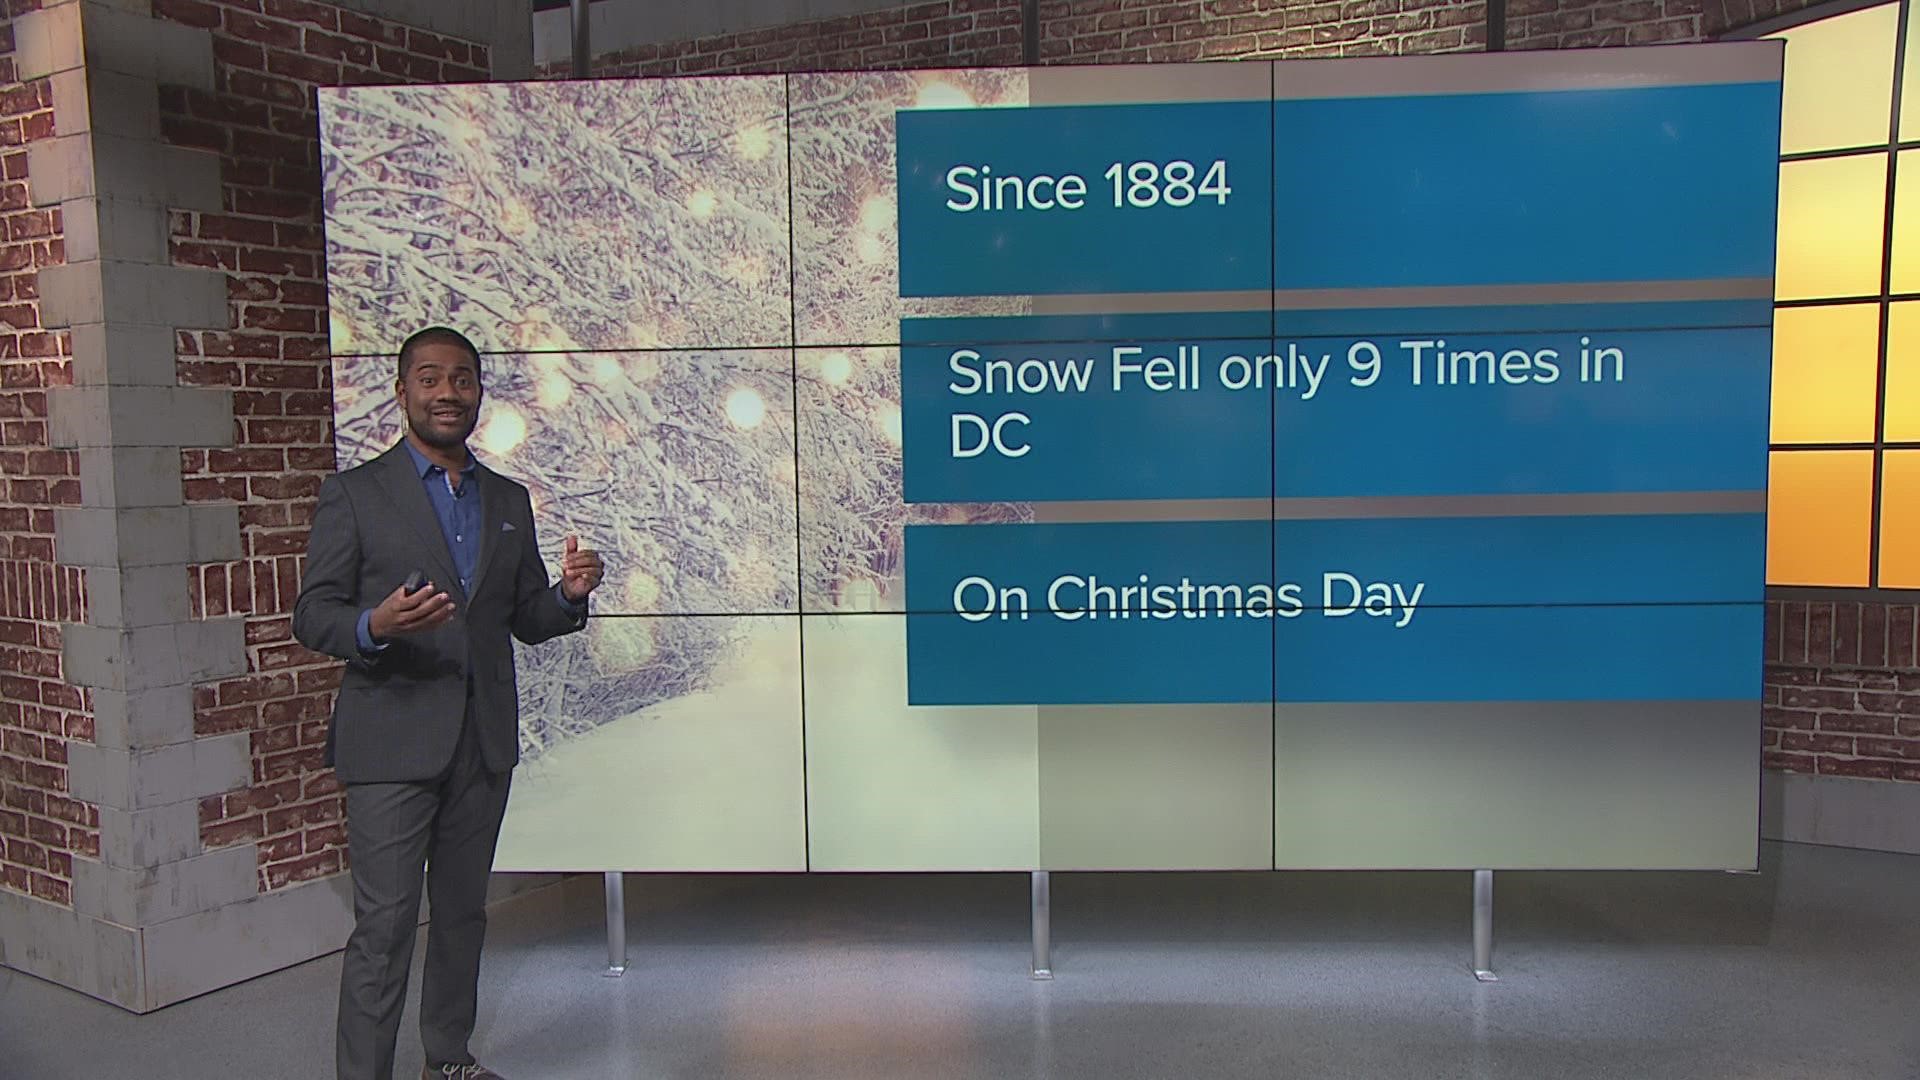 Historically, chances of a white Christmas in D.C. are slim.